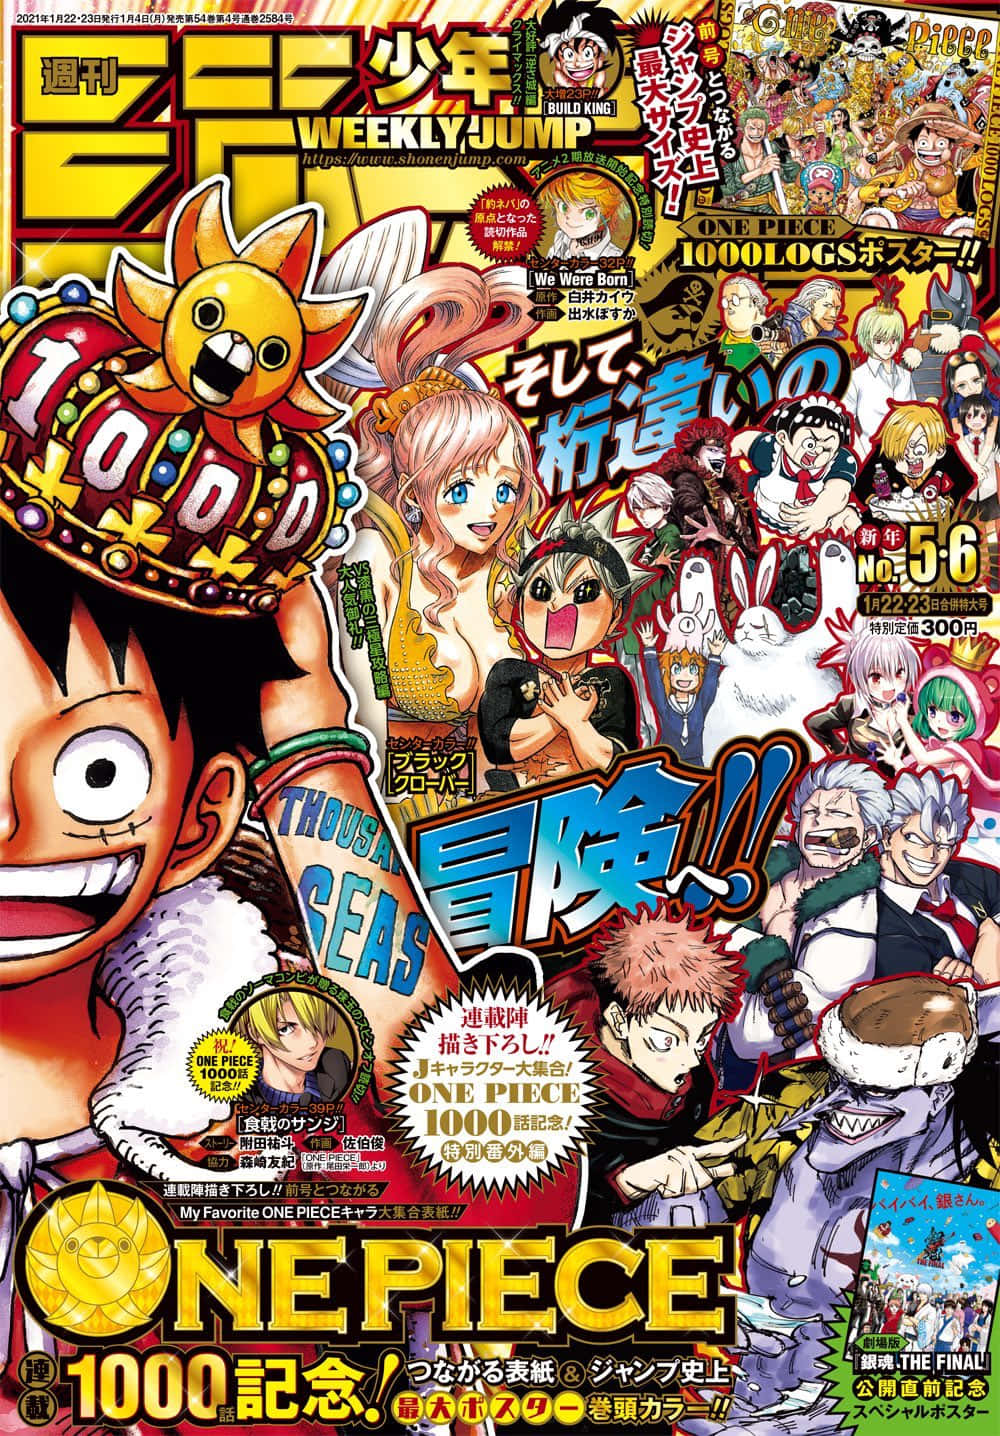 Read the latest adventures of your favorite manga characters in Shonen Jump! Wallpaper